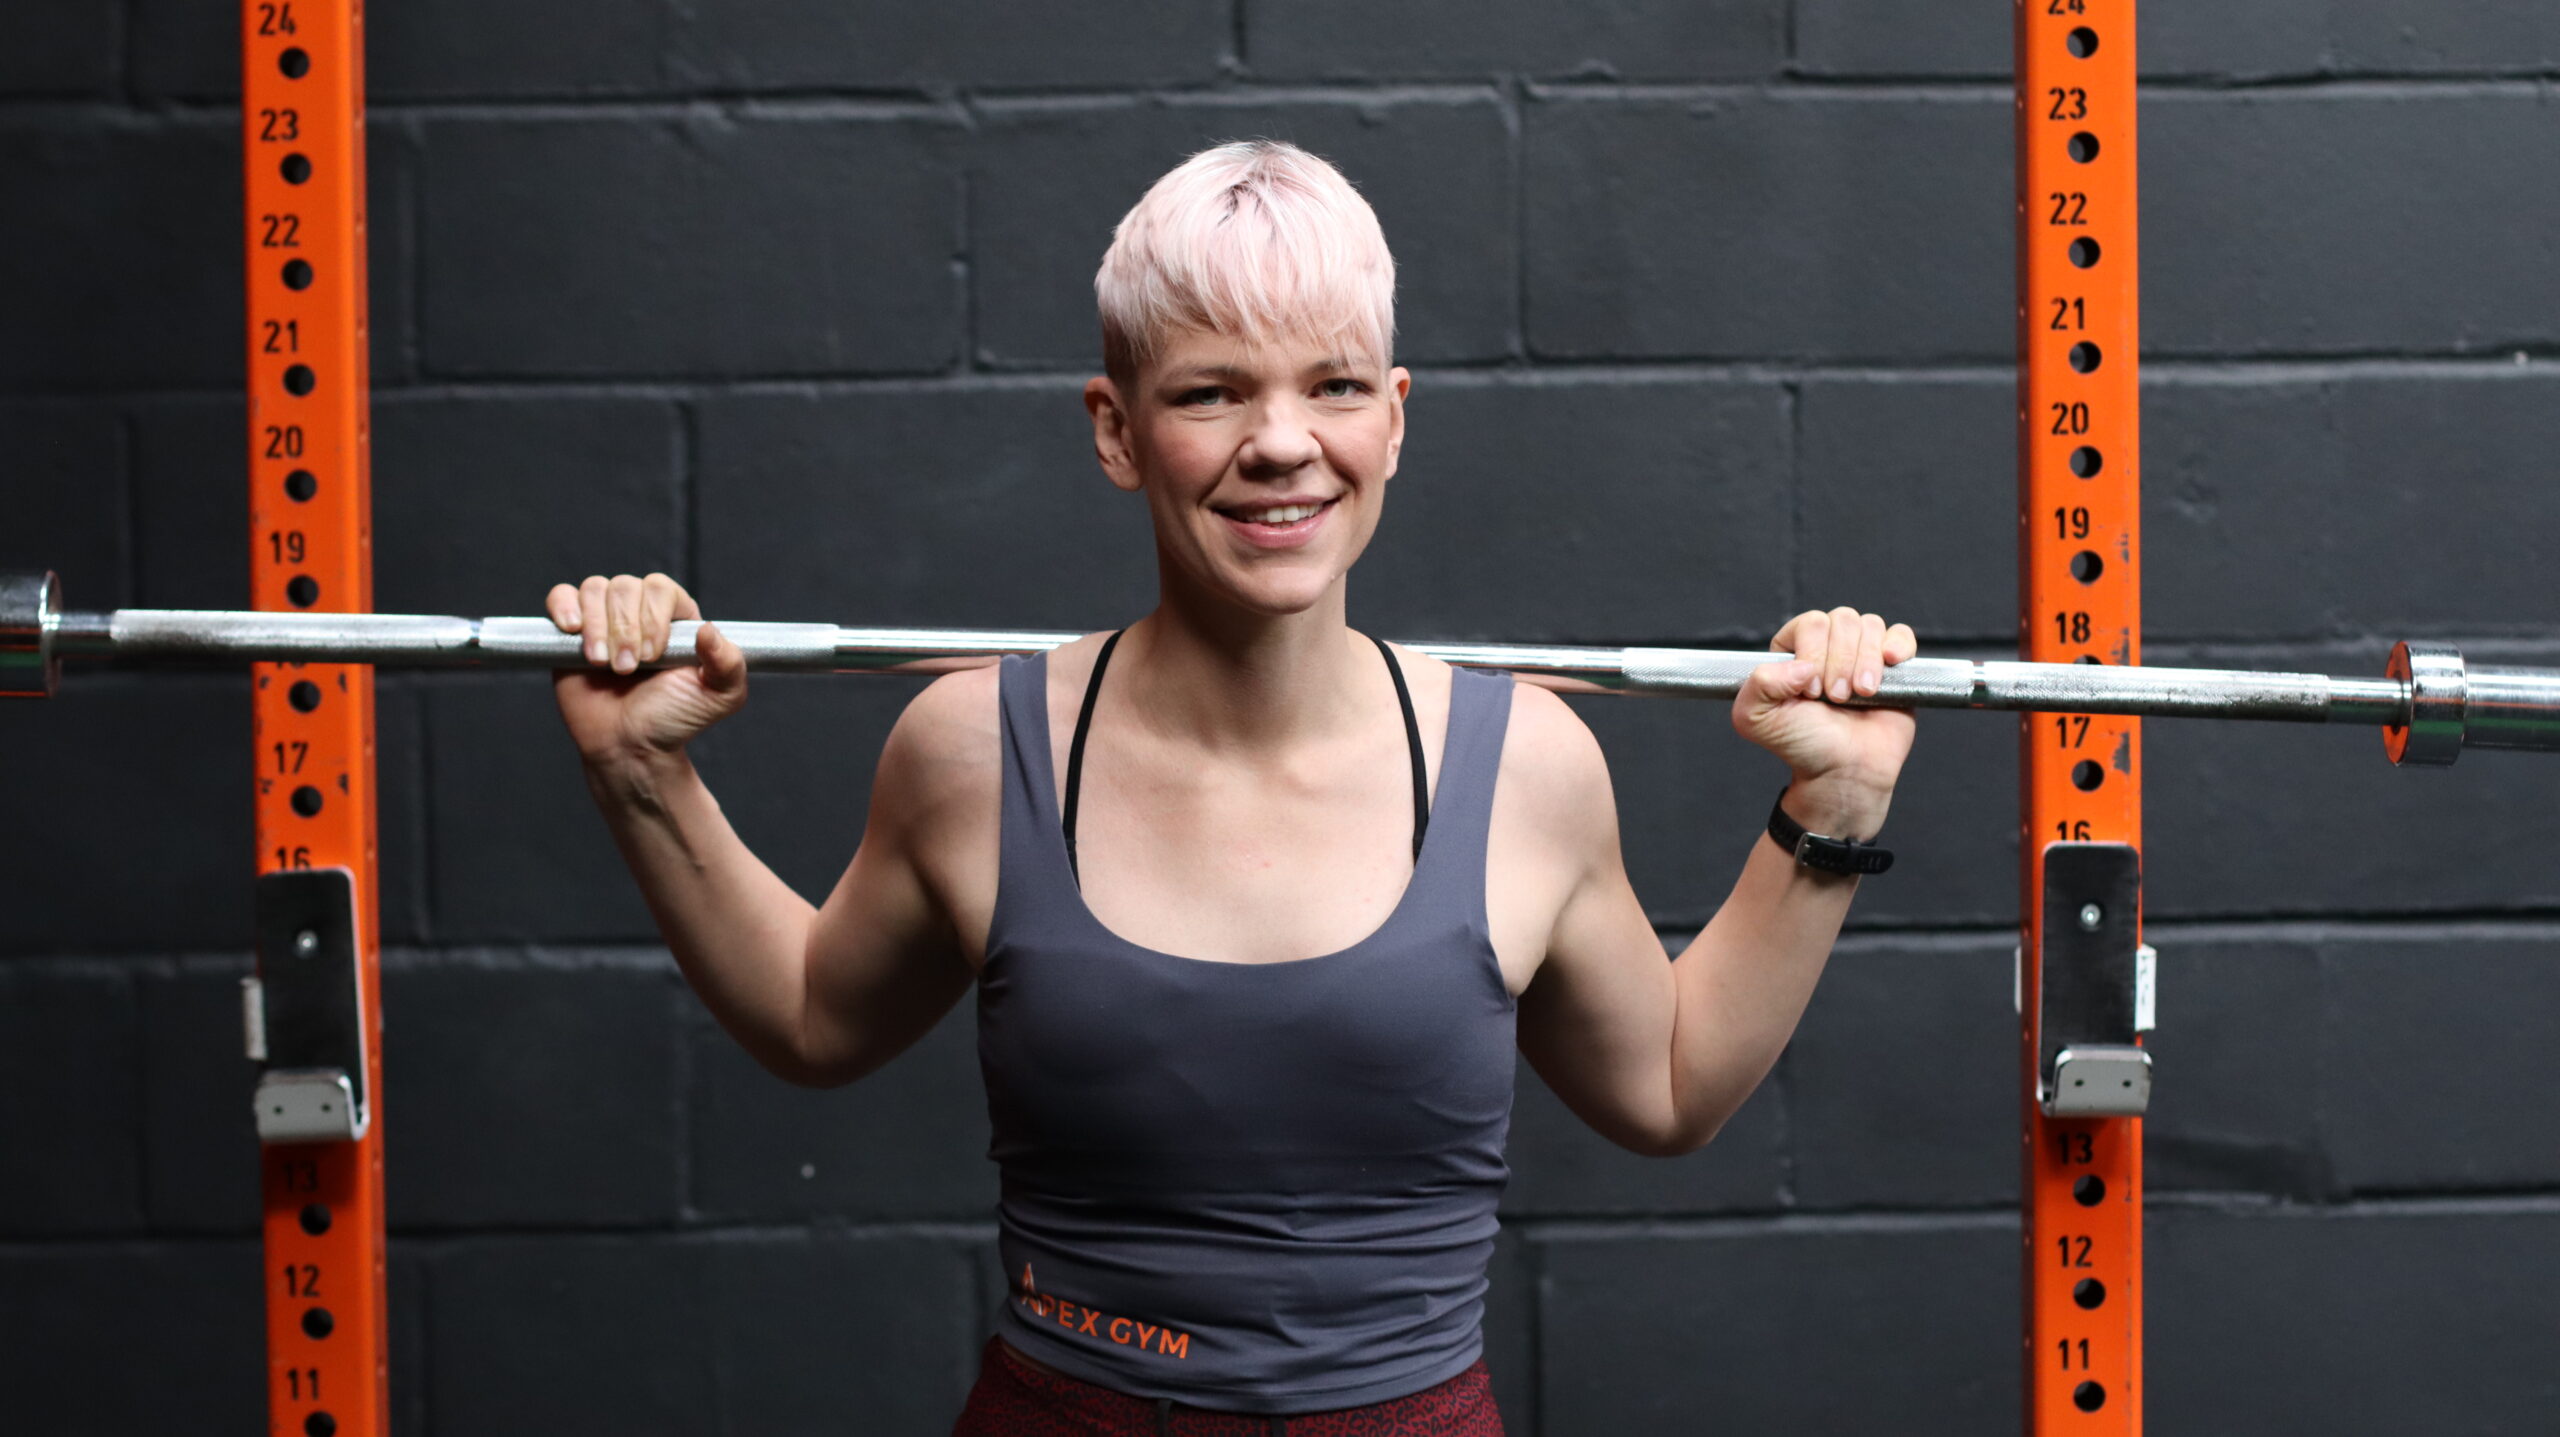 Amelia Lawes, Founder of Apex Gym, holding barbell